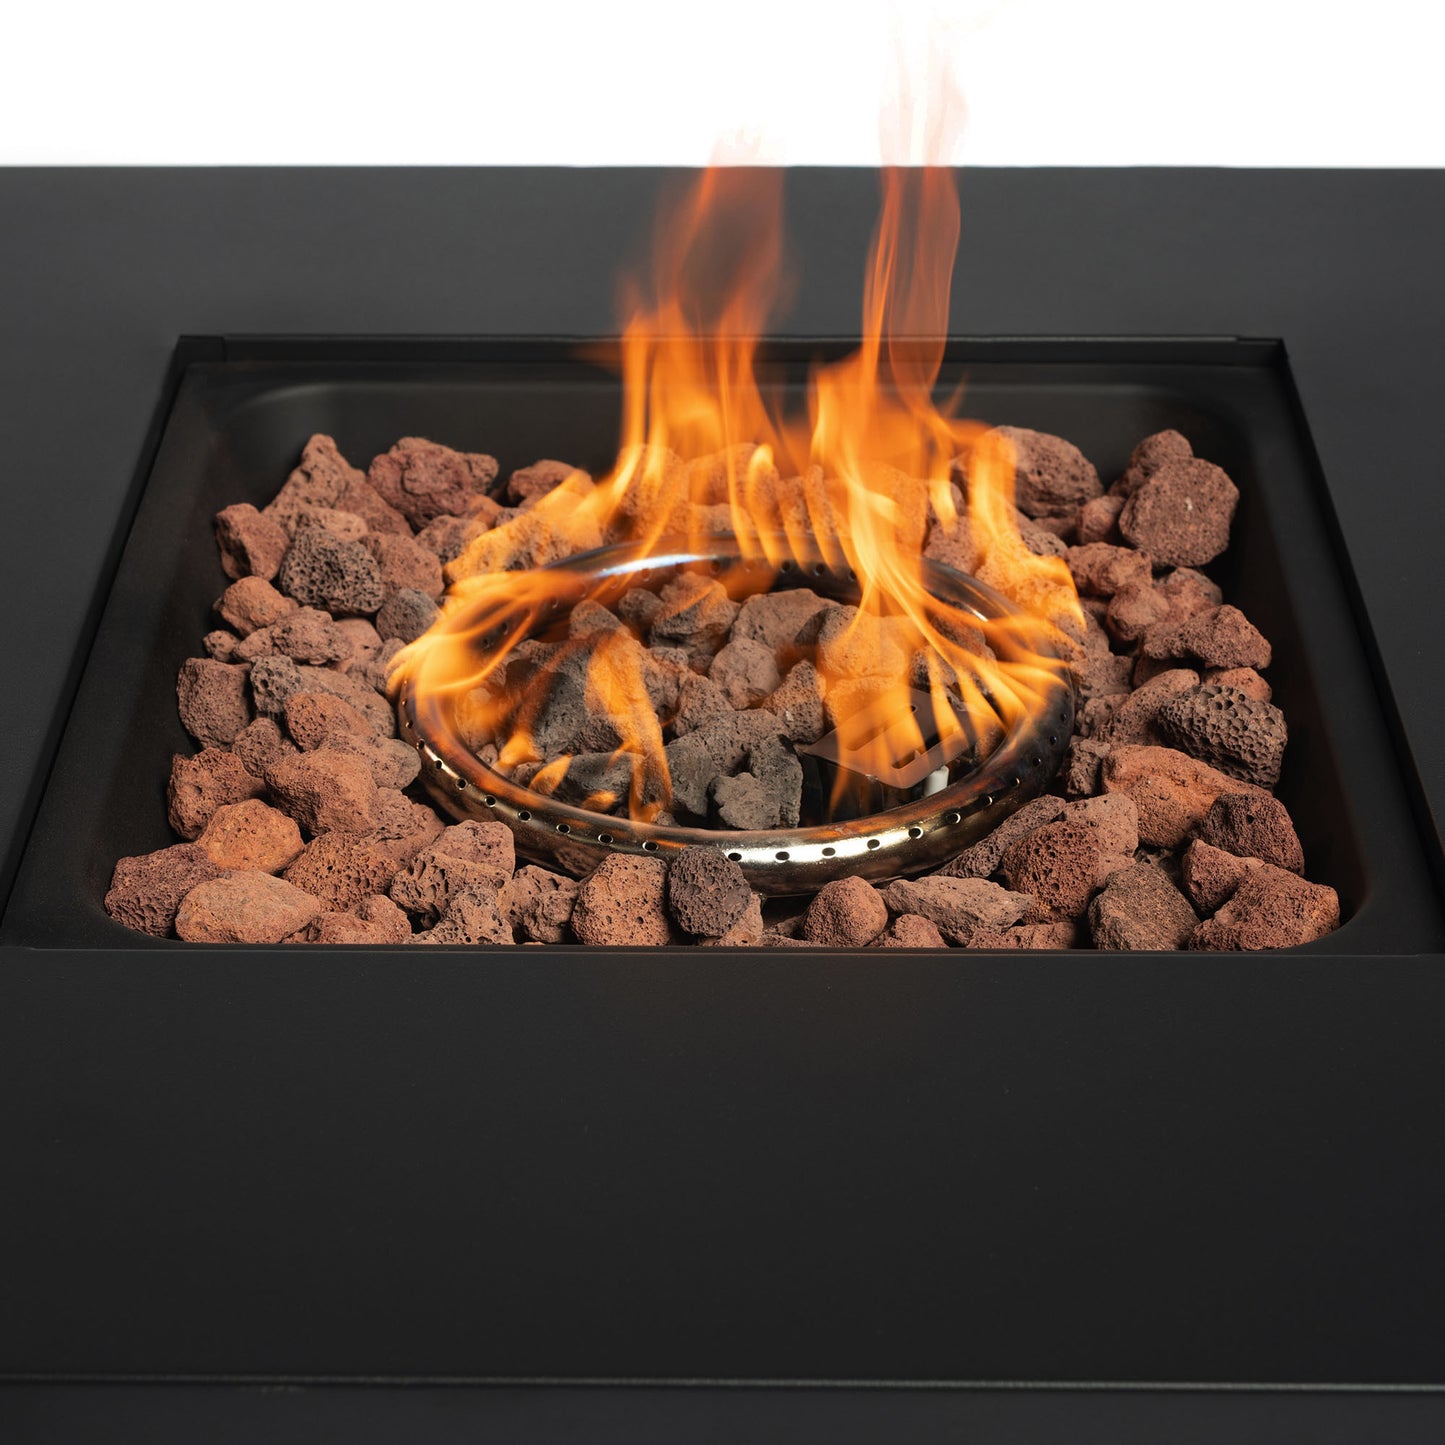 40000BTU Steel Propane Fire Pit Table with Textilene Side Panel and Steel Lid